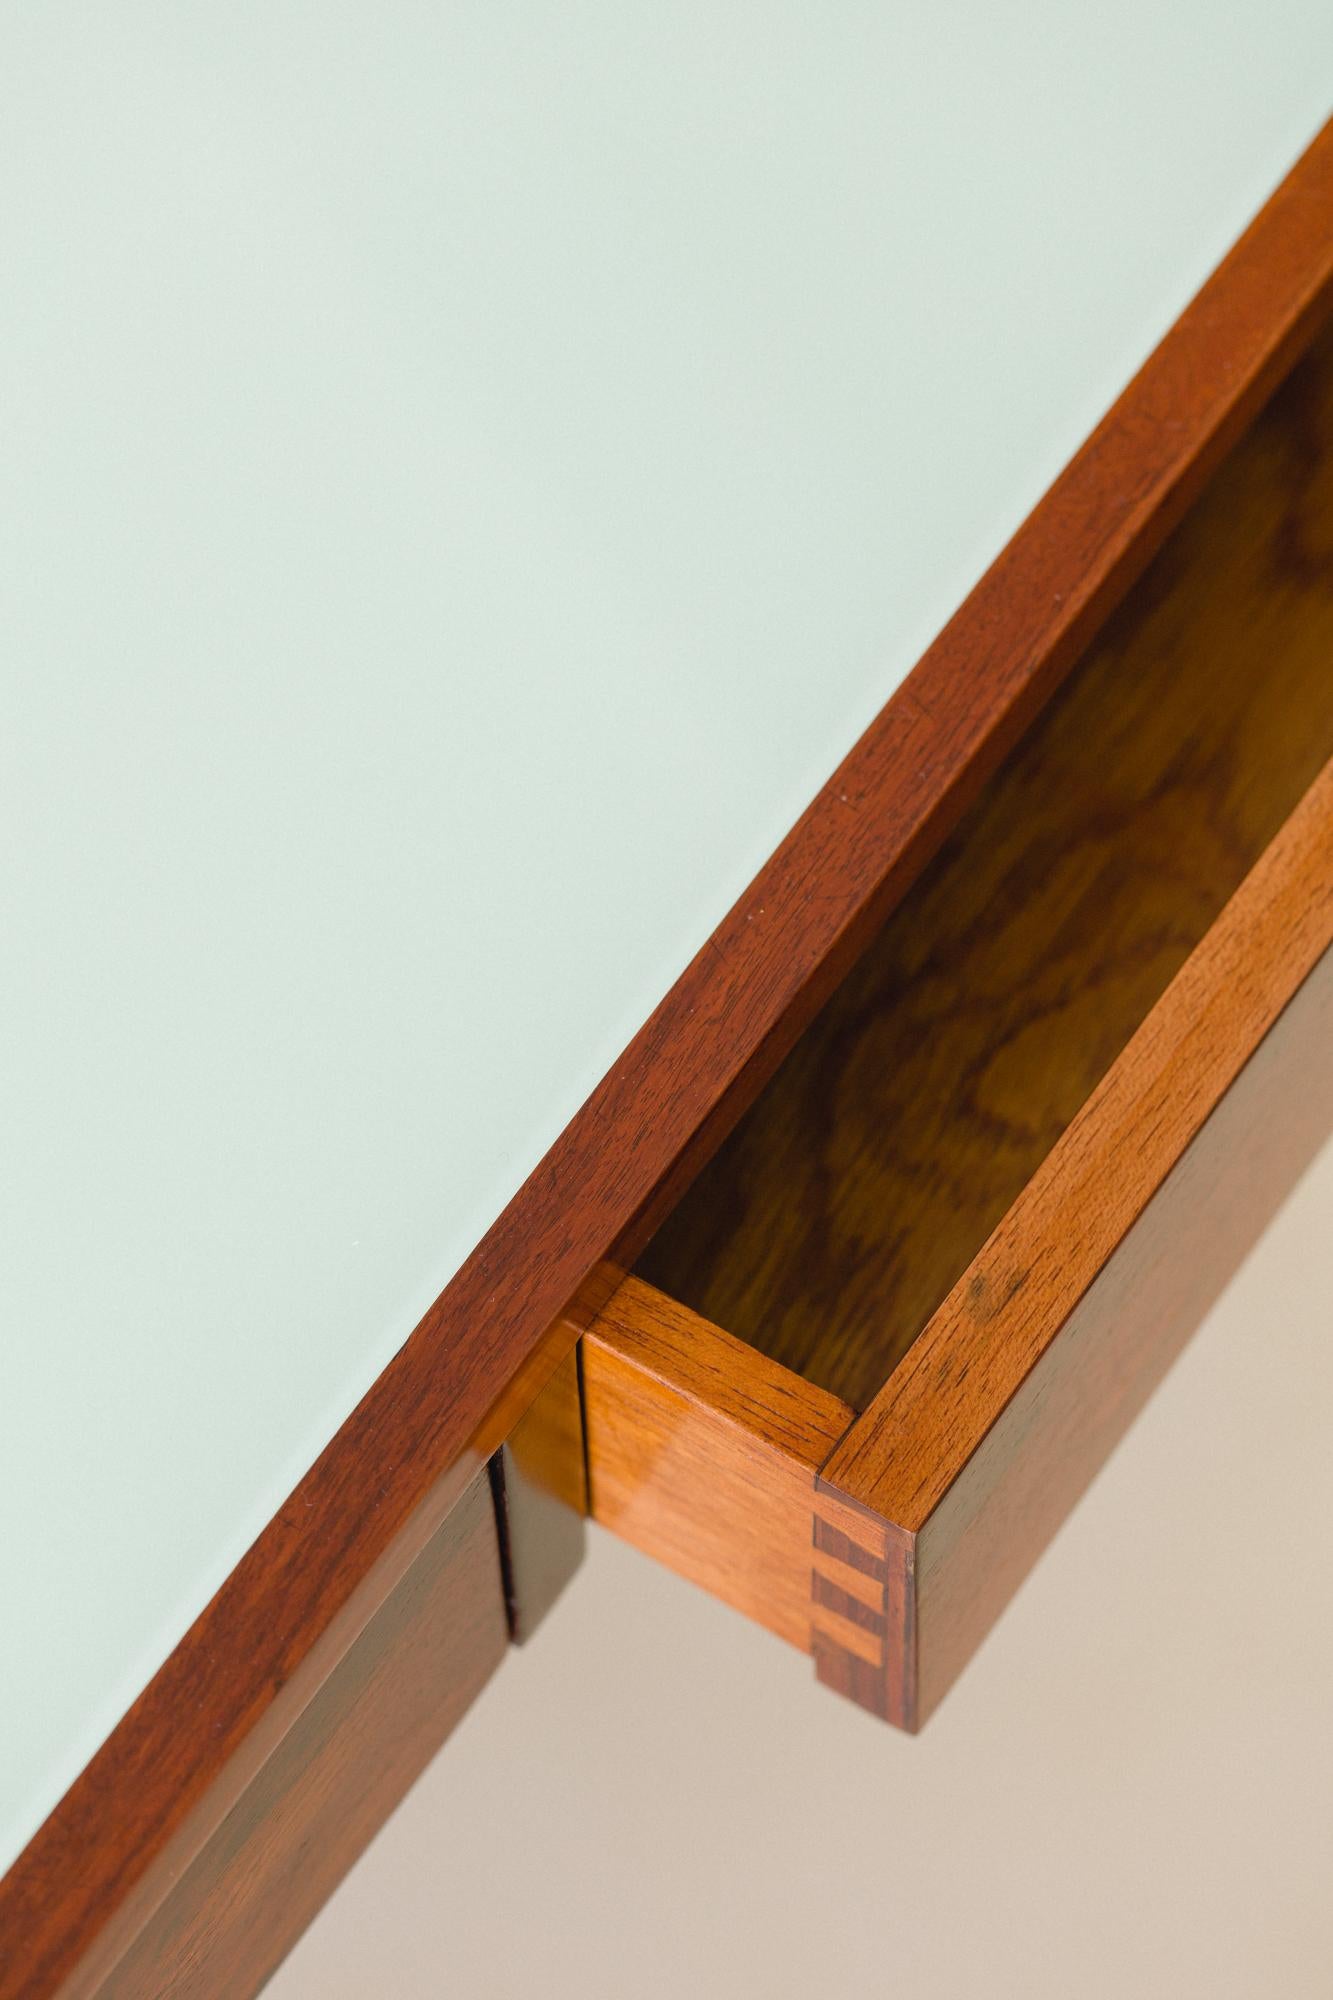 Rosewood Desk with Painted Glass Top by Joaquim Tenreiro, Bloch Editors, 1960s For Sale 4